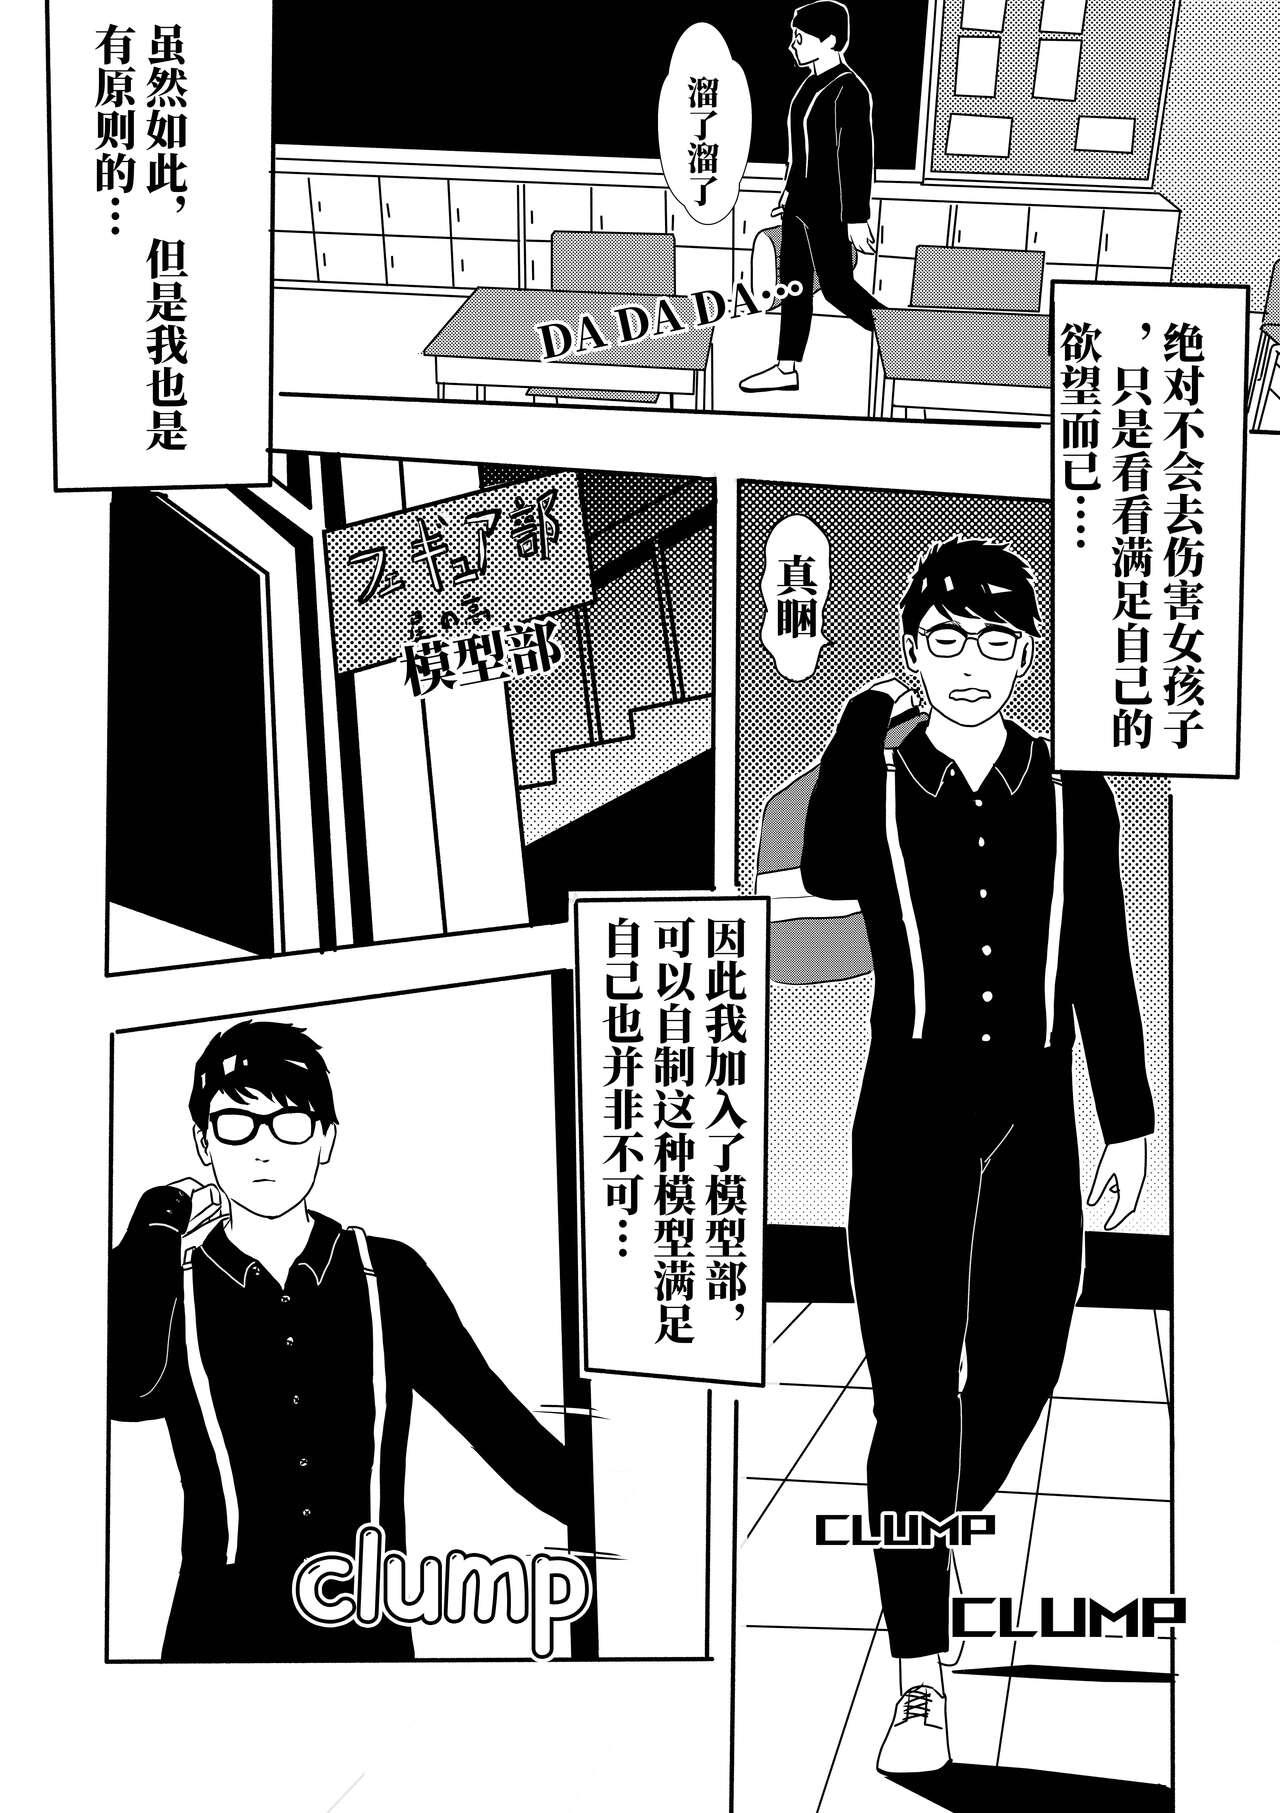 Hidden Camera [KAO.YELLOW STUDIO (T.C.X)] I must be out of my mind to fall in love with SAORI, the Snuff Queen Ch.1-16 | 想与冰恋女王纱织同学谈恋爱的我脑子一定有问题 第1-16话 [Chinese] - Original Old And Young - Page 4